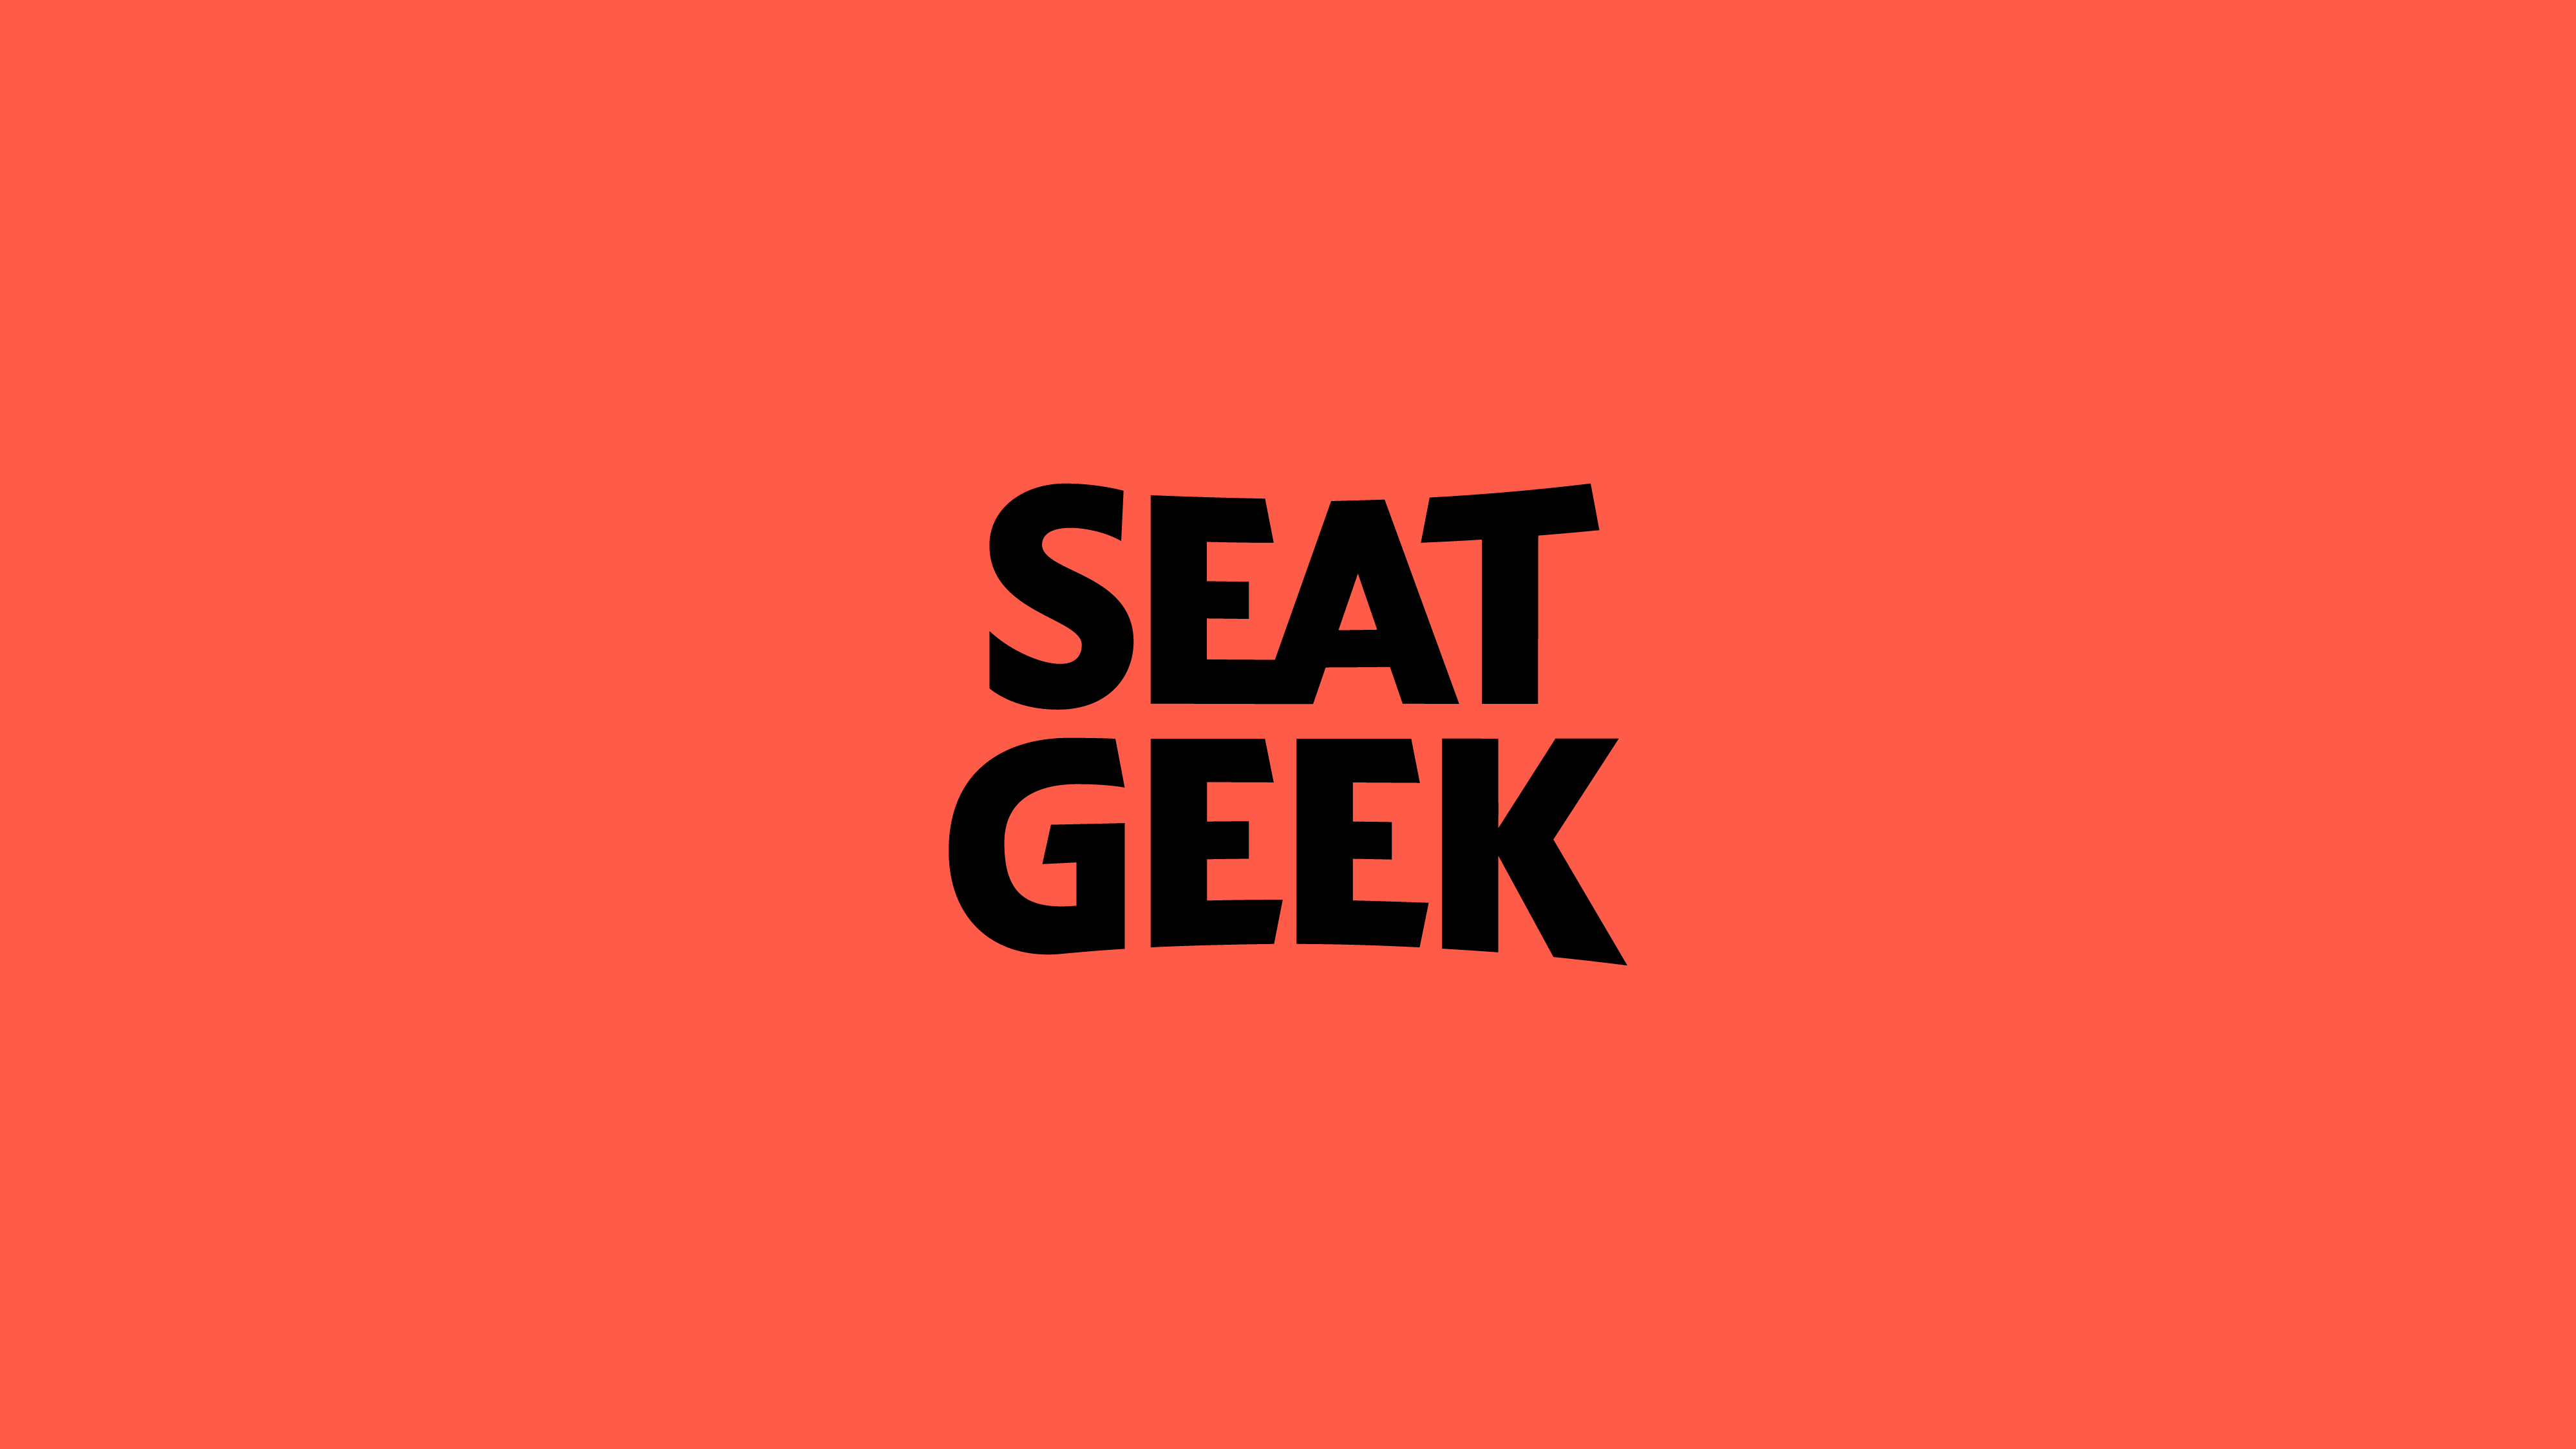 SeatGeek (Football) - 1st Time User Discount with Promo Code: BOHNING thumbnail